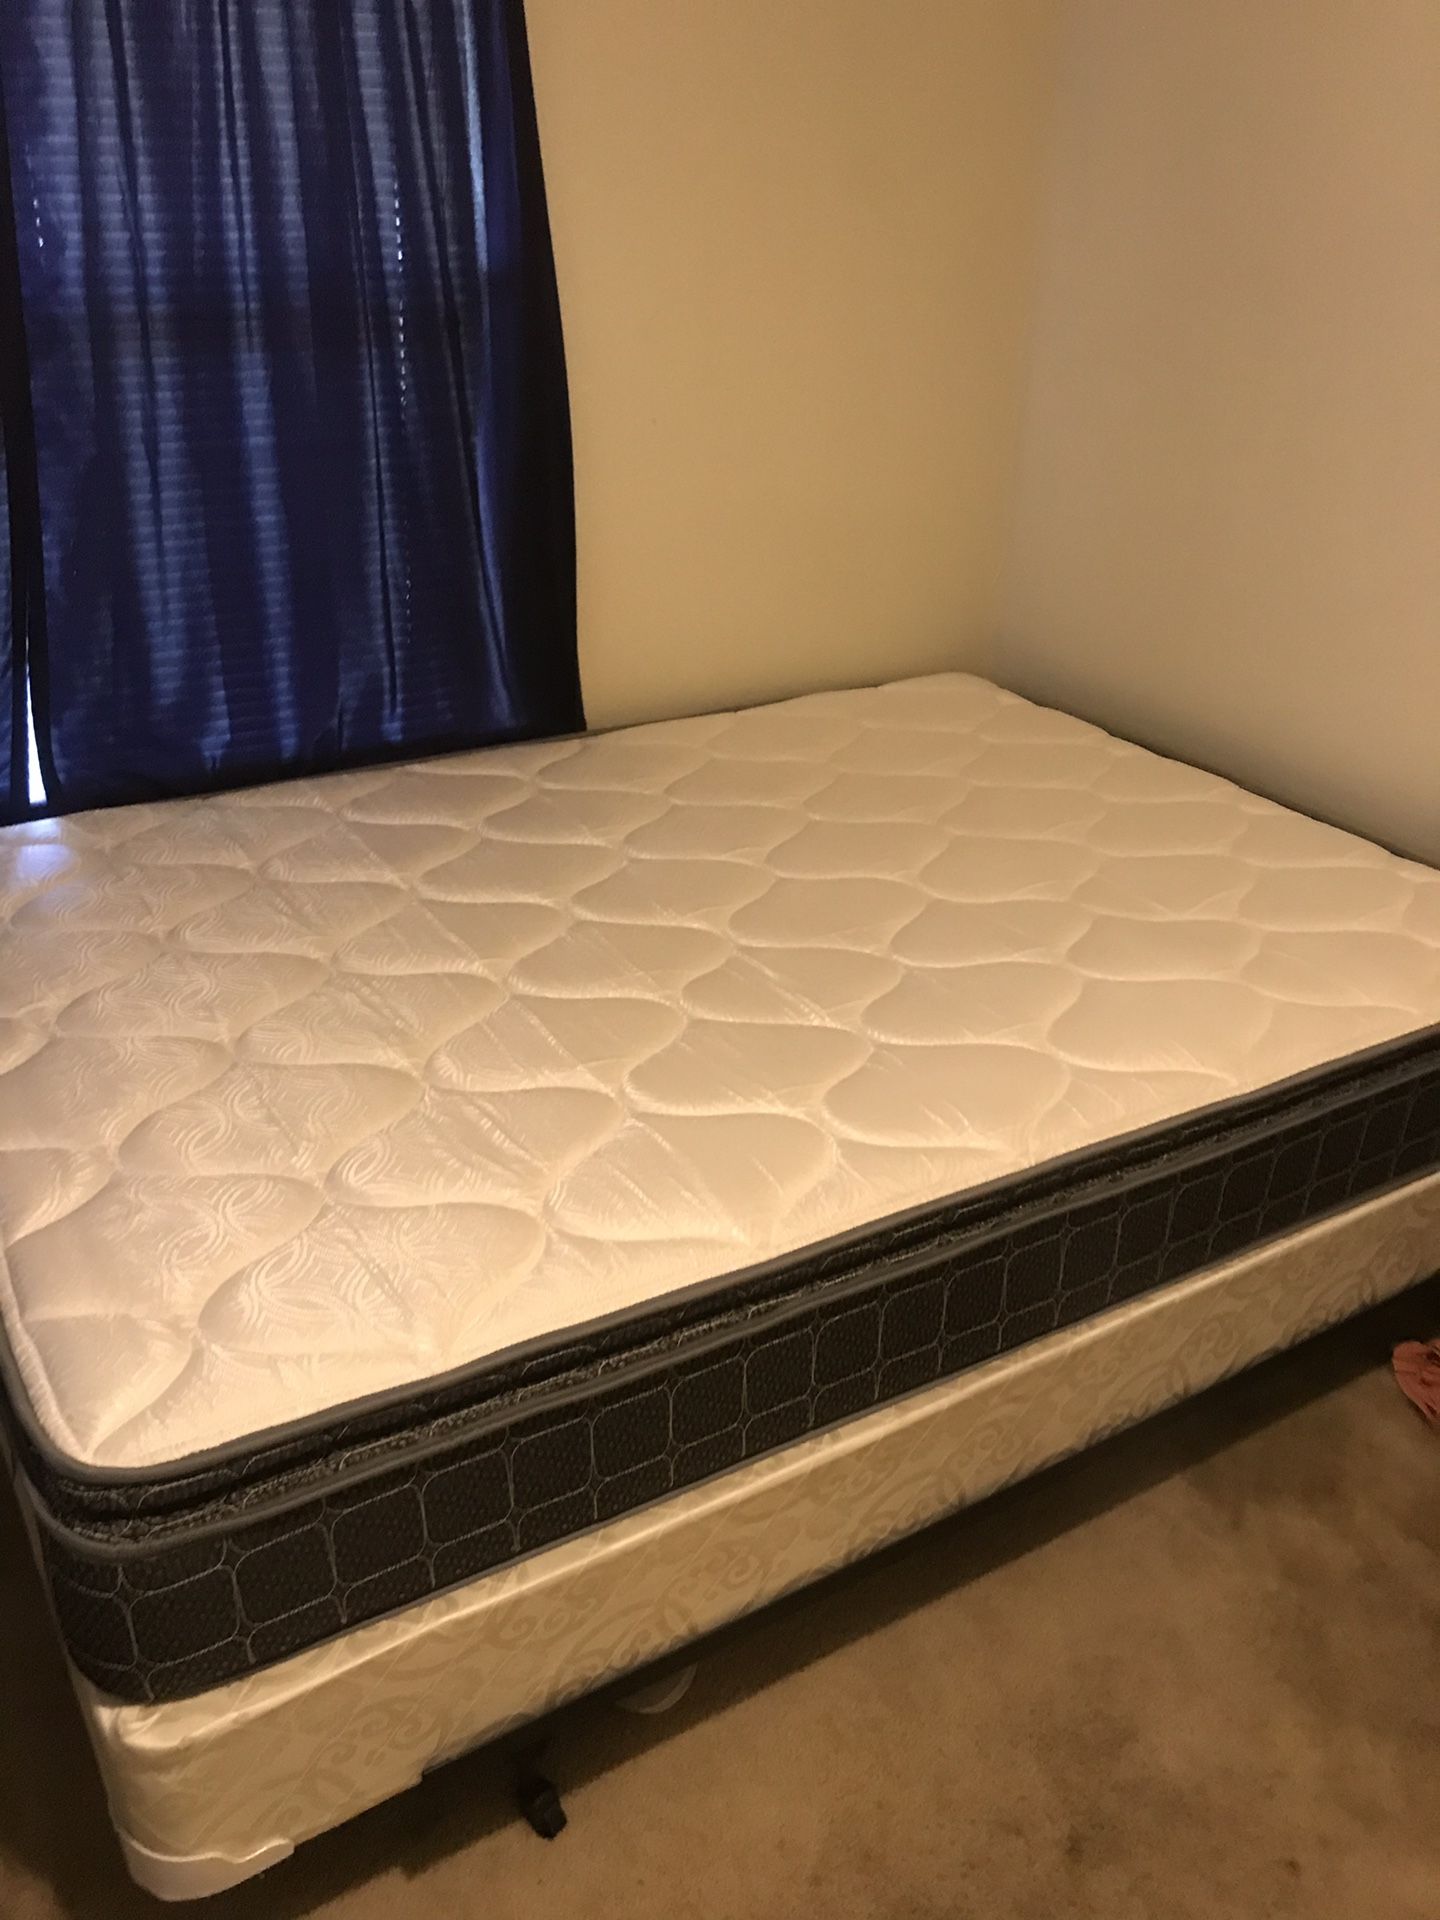 Full size bed mattress and frame. 2 months old.